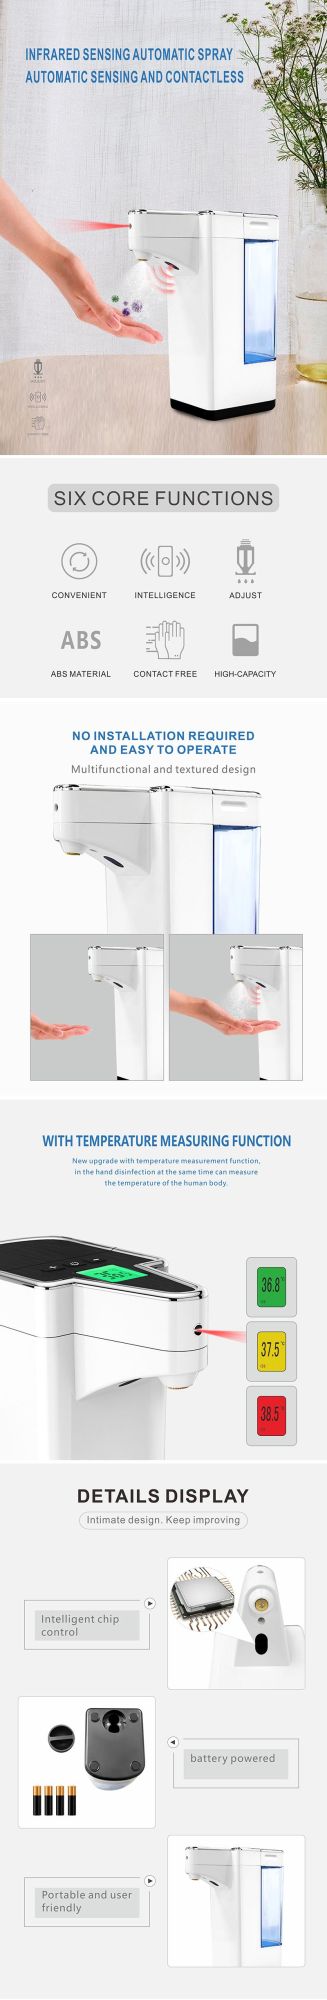 Automatic Foaming Hand Free Soap Dispenser Touchless Foam Liquid Soap Dispenser for Hospital Office Hotel